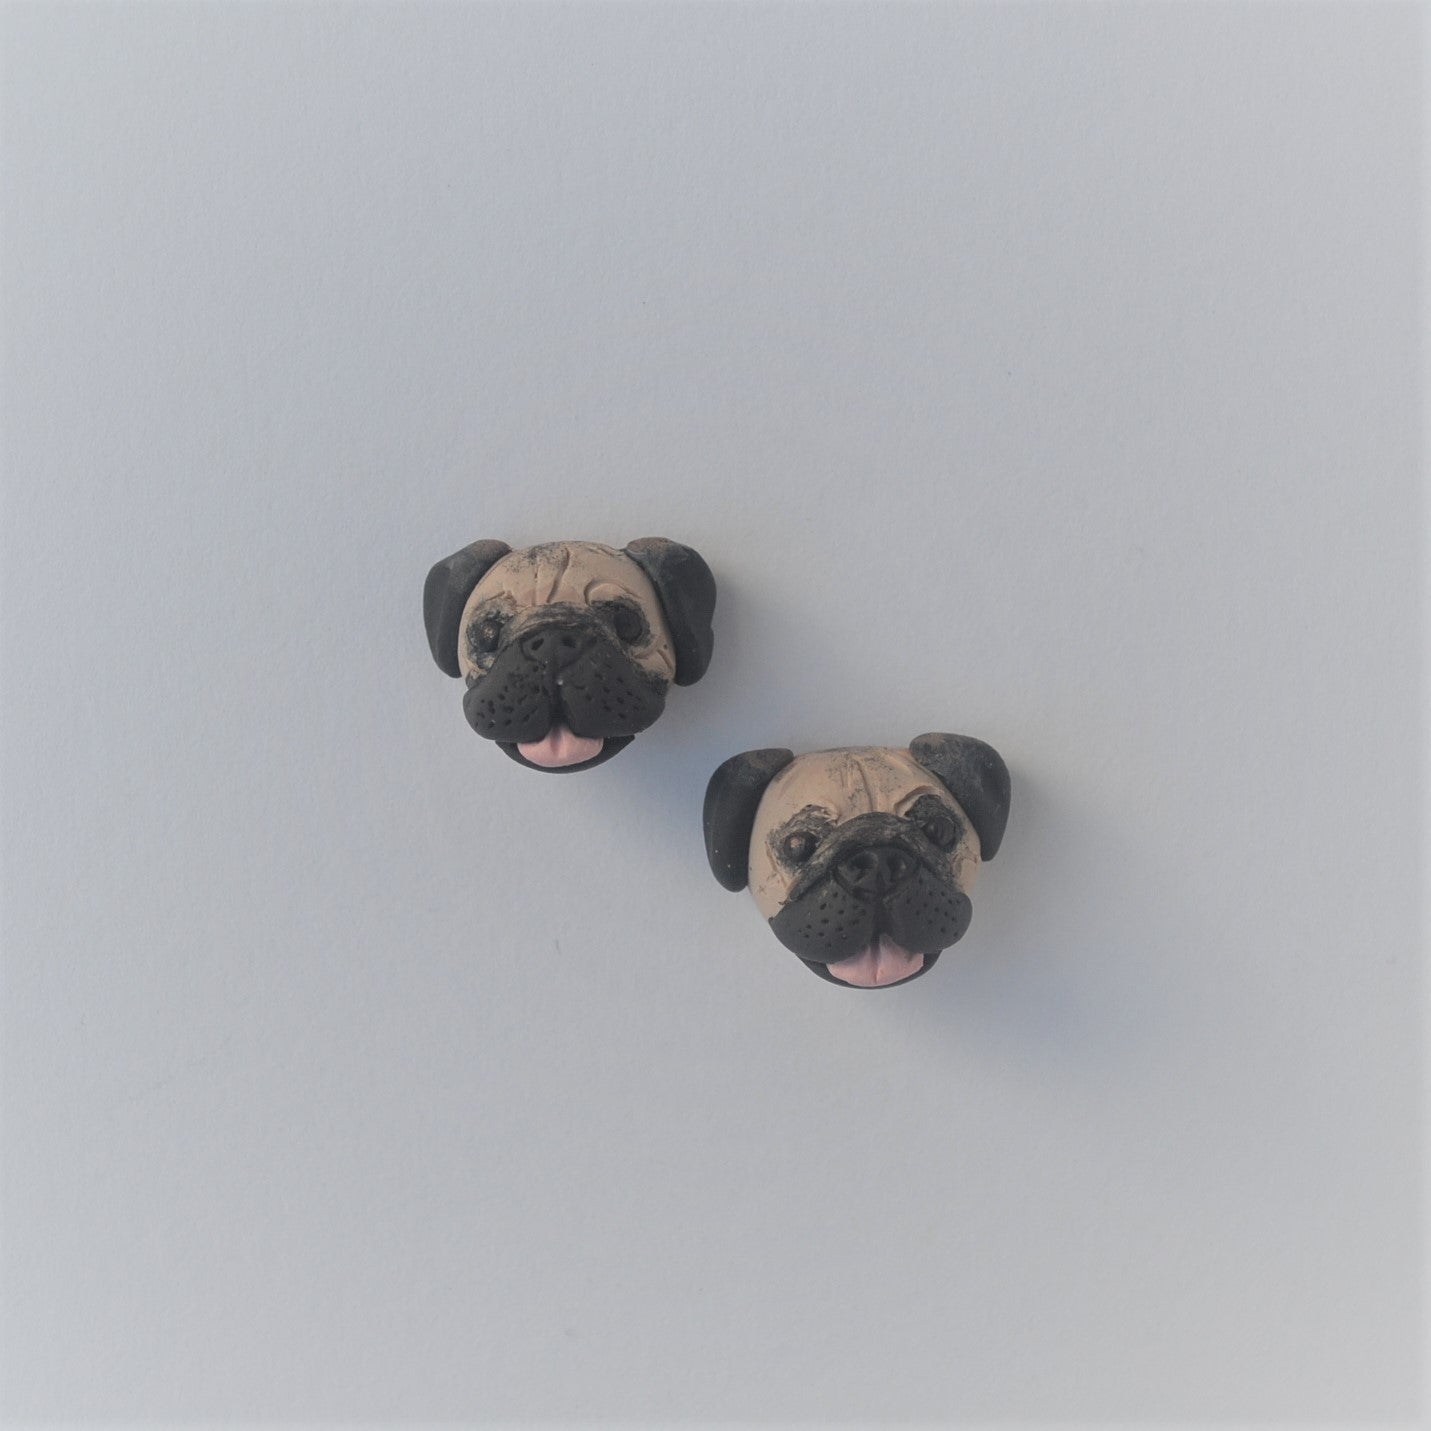 Handmade polymer clay pug stud earrings shown offset on white background